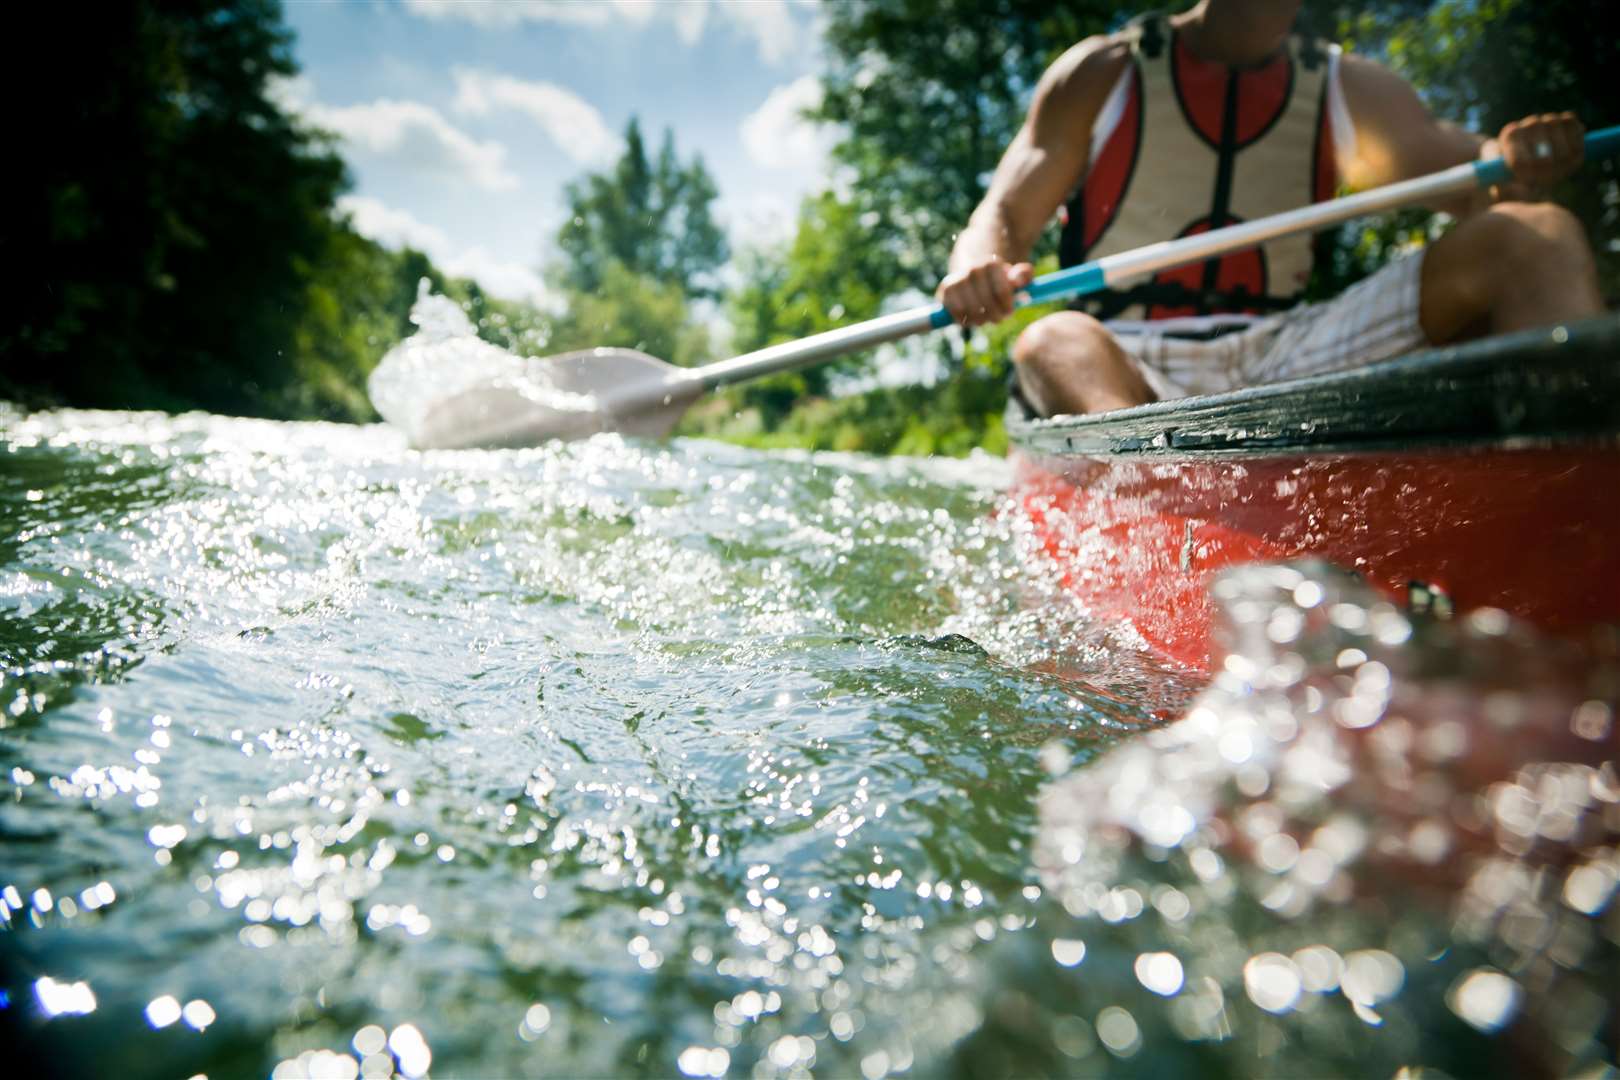 The SCA said it would publish detailed guidance for paddlers before May 28.